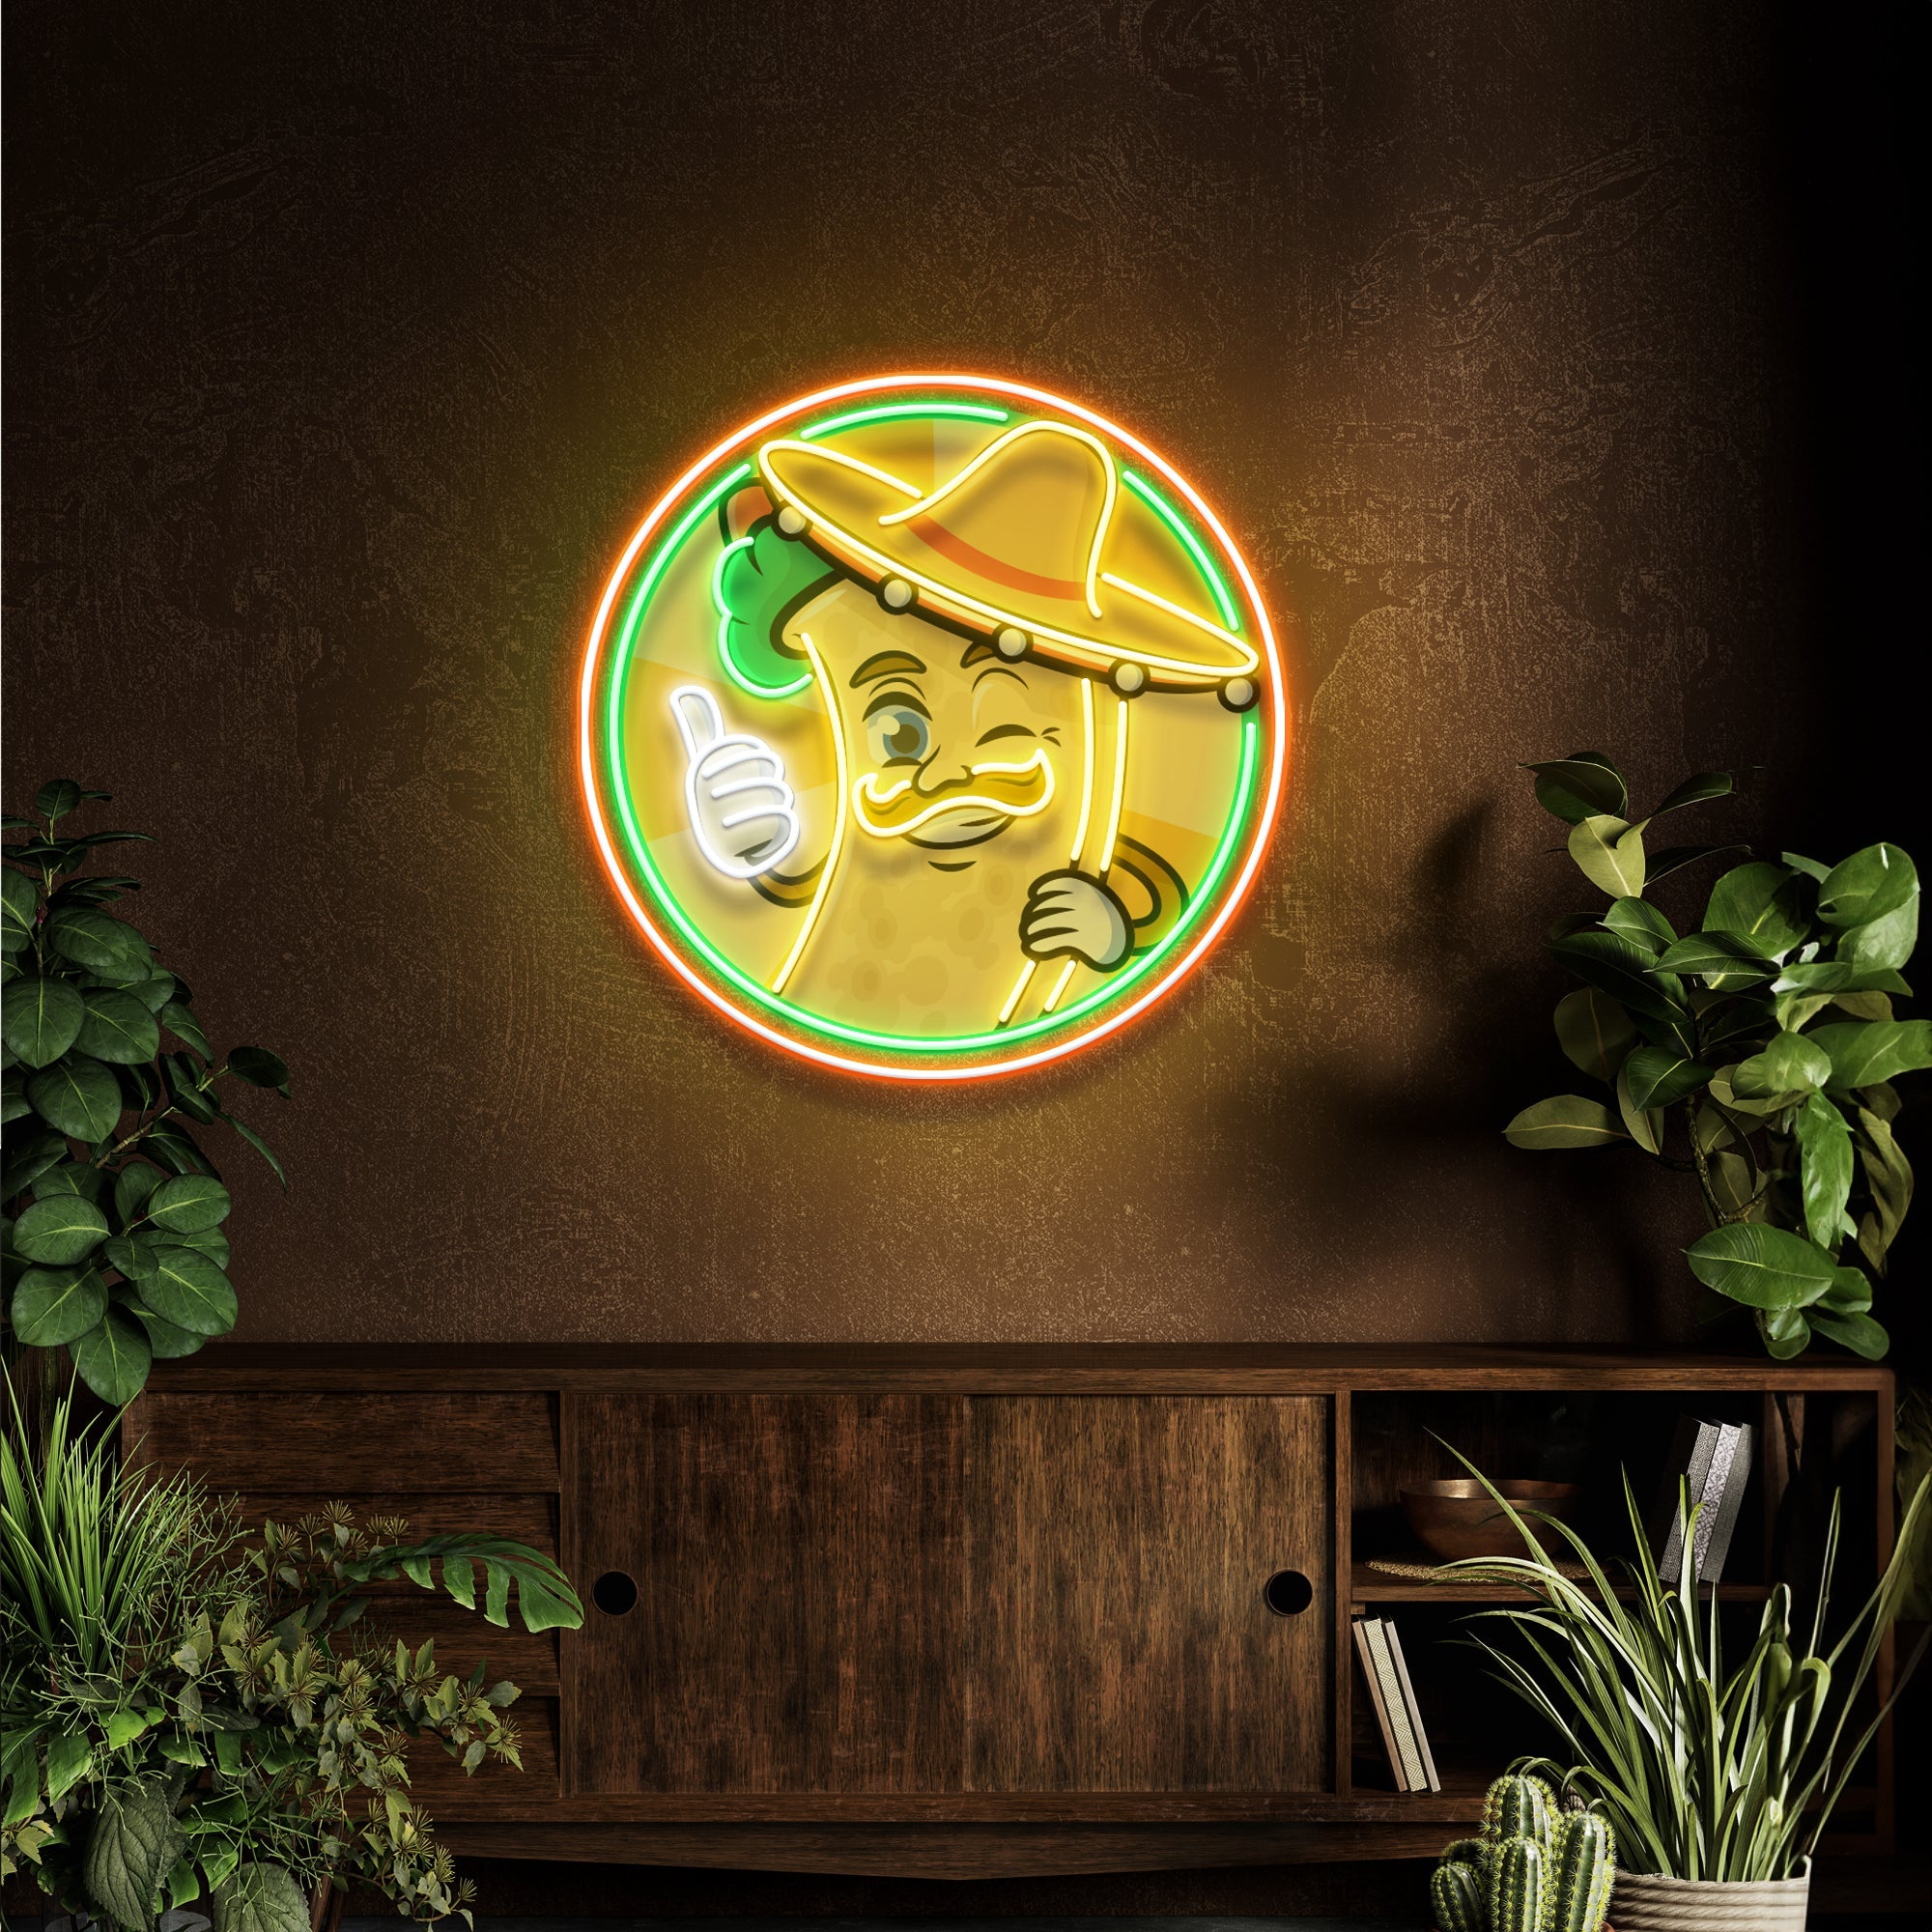 Mexican Burrito Thumbs Up Artwork Led Neon Sign Light - Neonbir